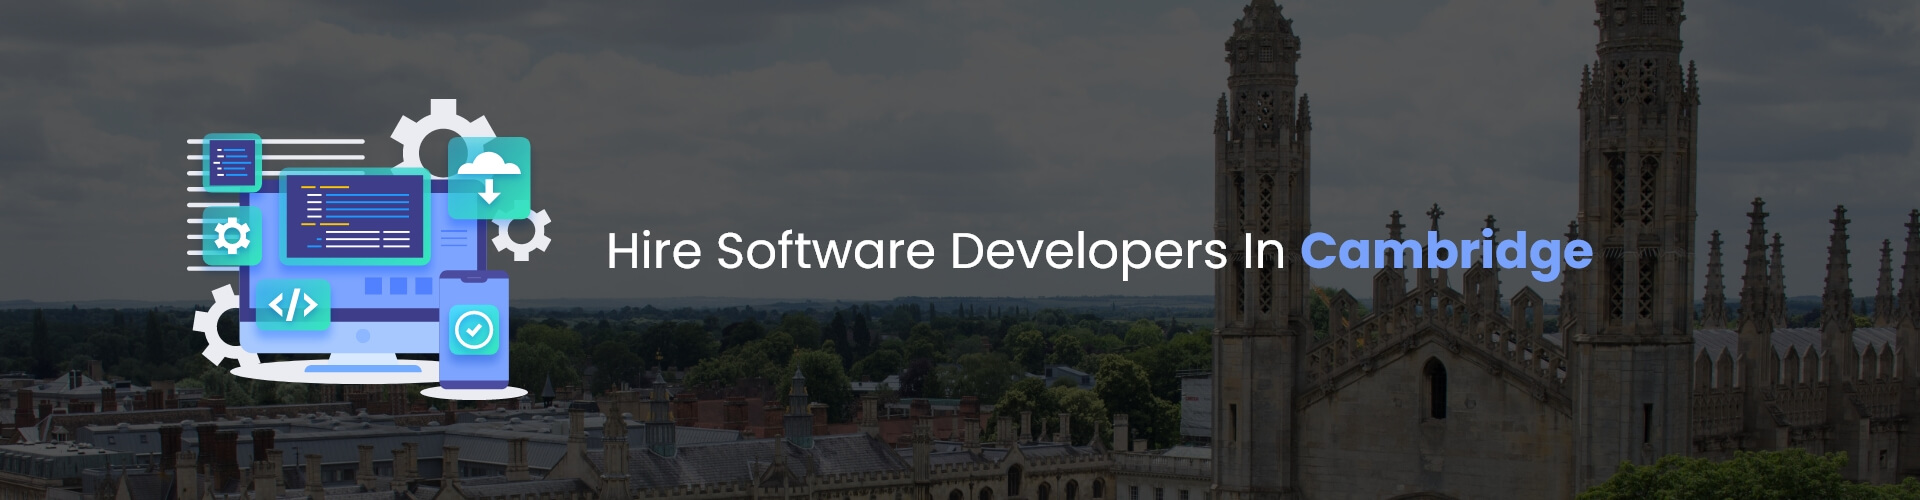 hire software developers in cambridge